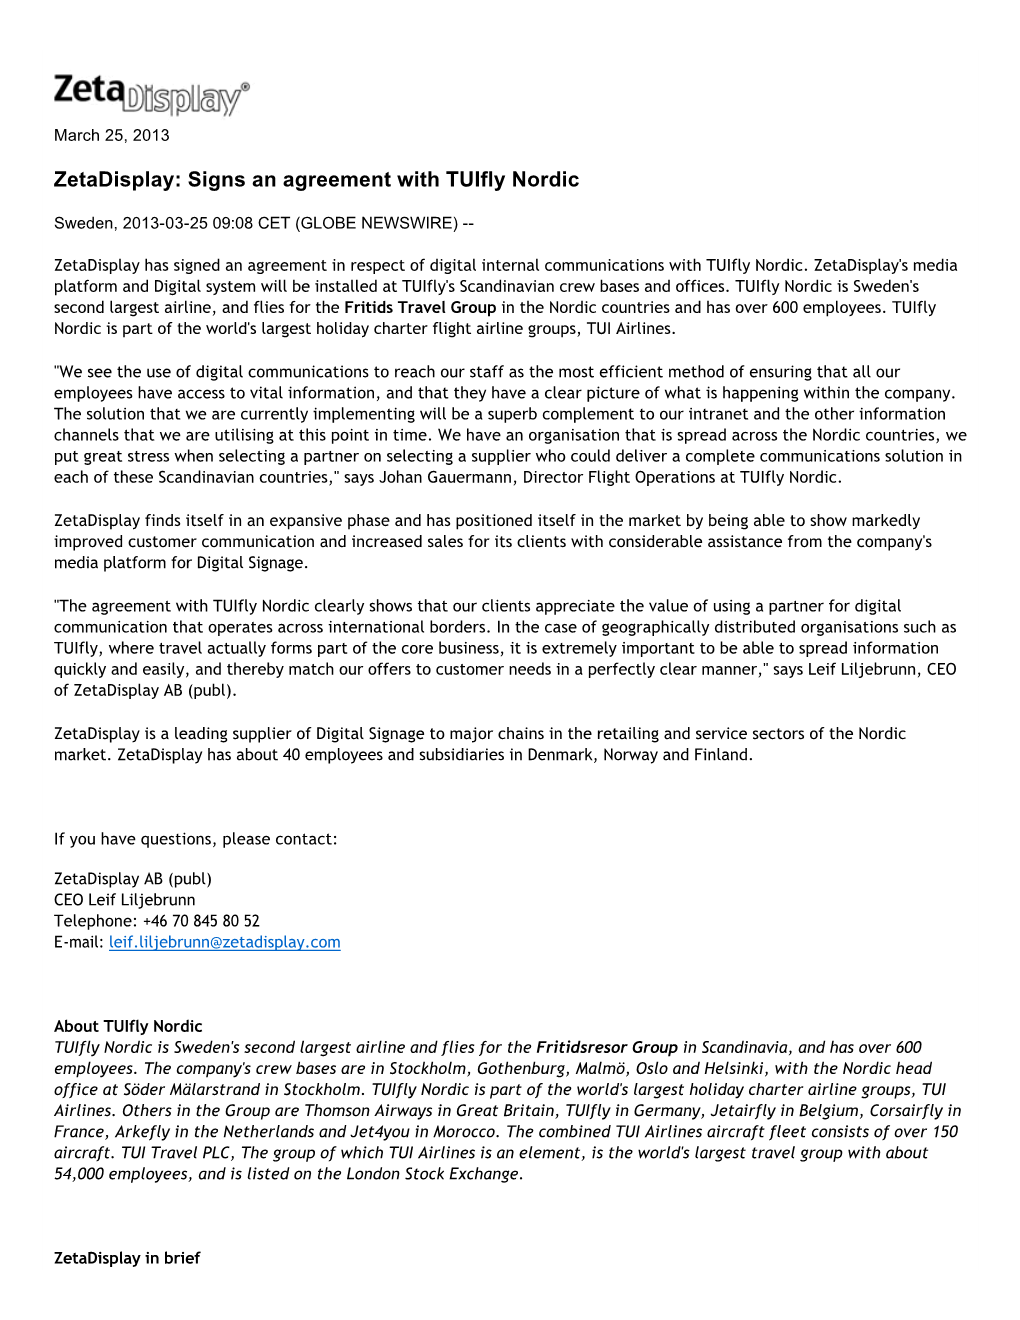 Signs an Agreement with Tuifly Nordic